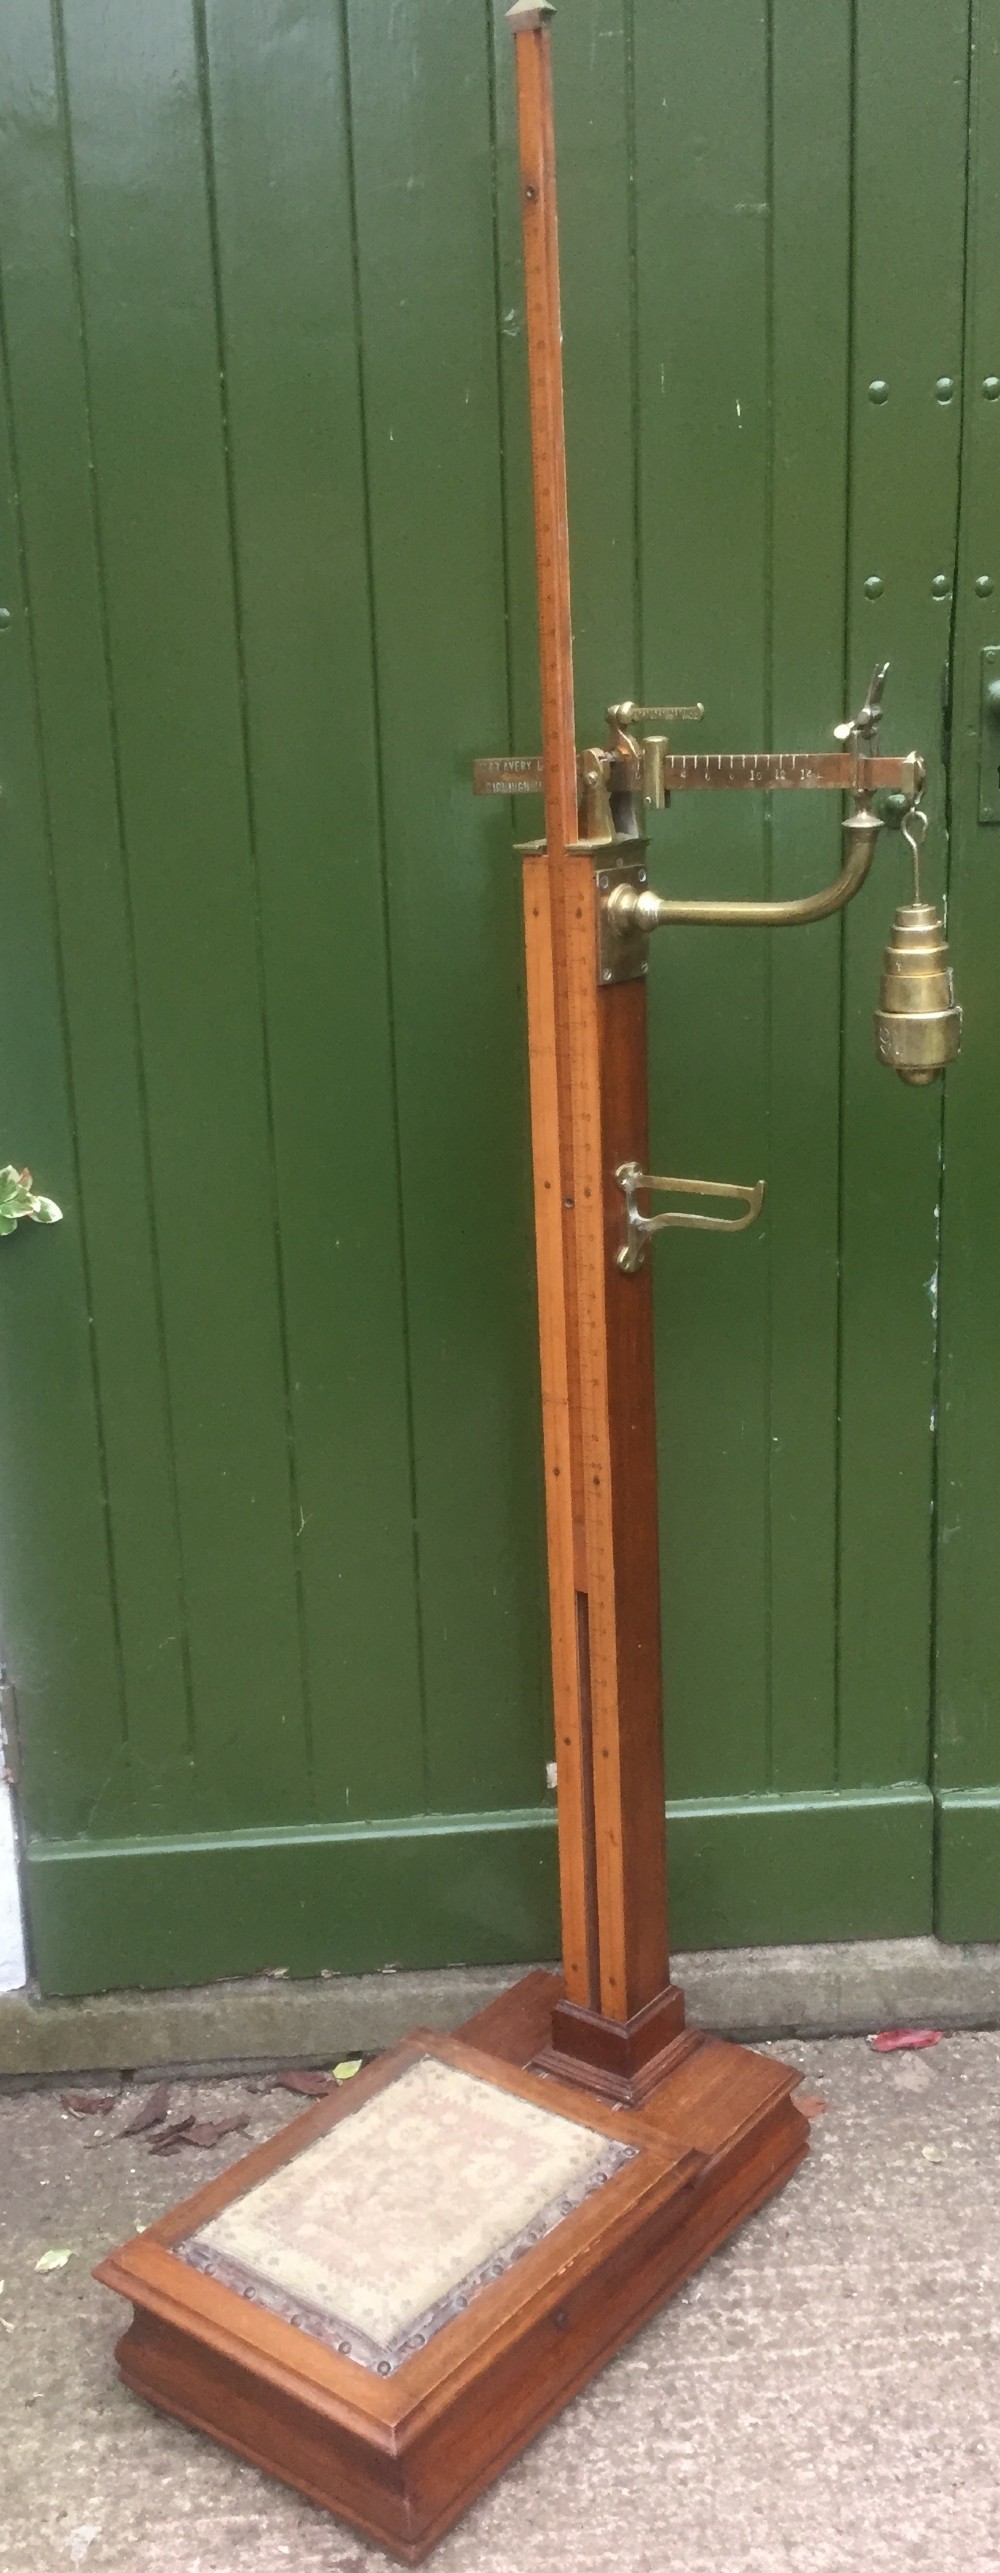 a set of late victorian or edwardian oak and brass floorstanding scales by w t avery ltd birmingham